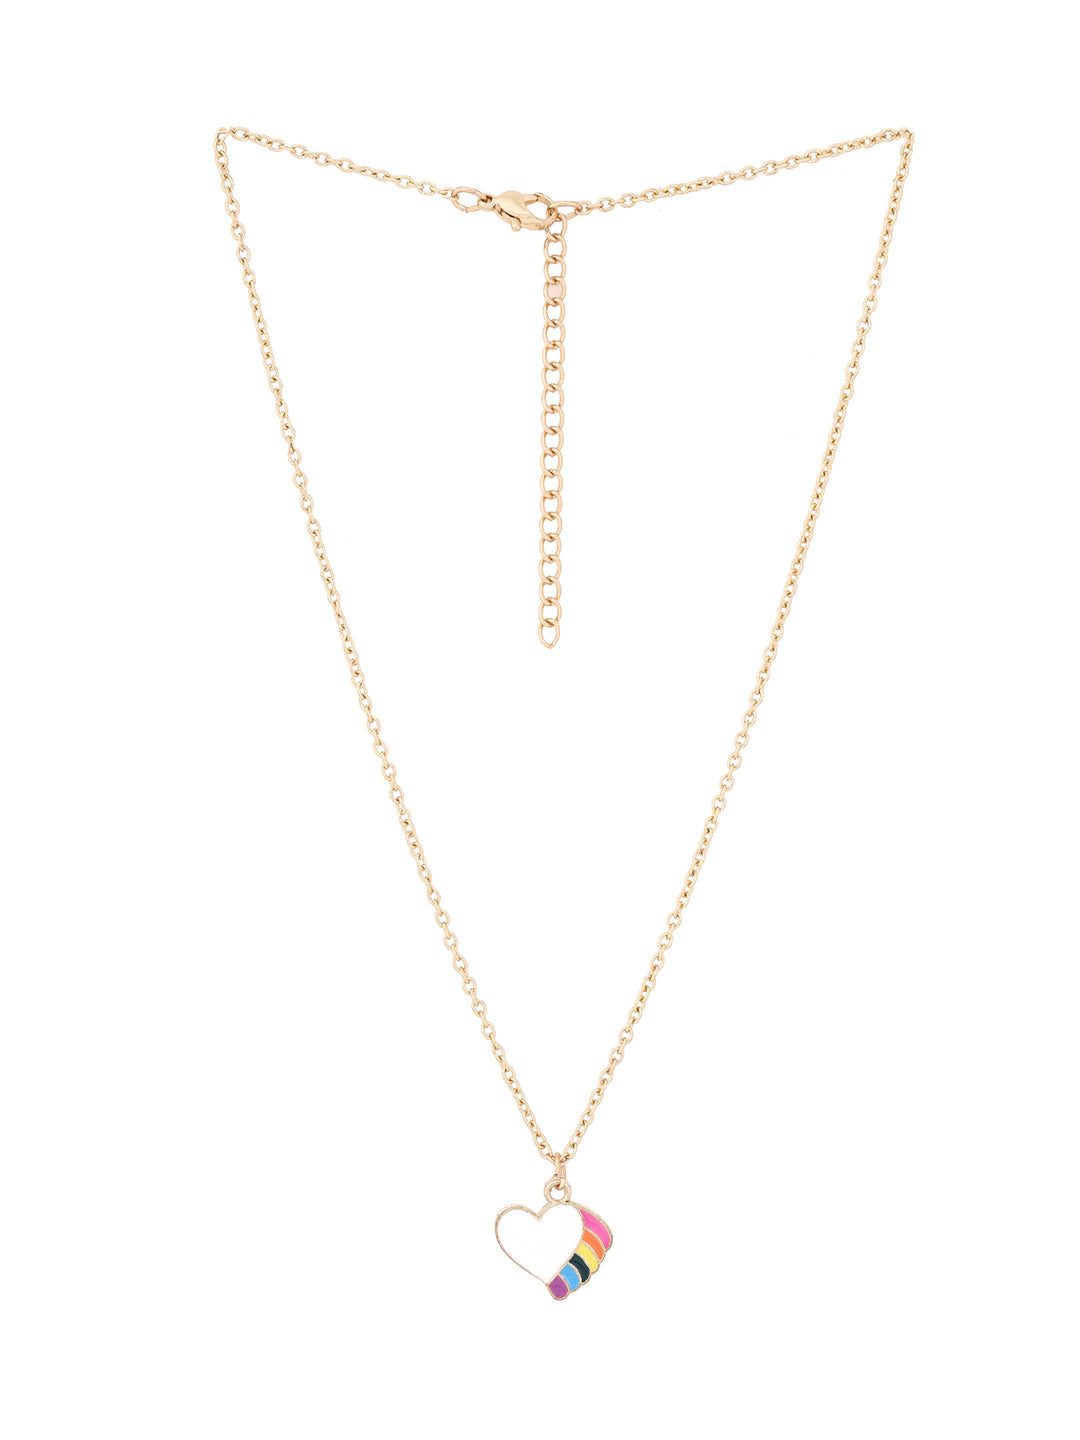 Priyaasi Heart Shaped Unicorn Colored Necklace